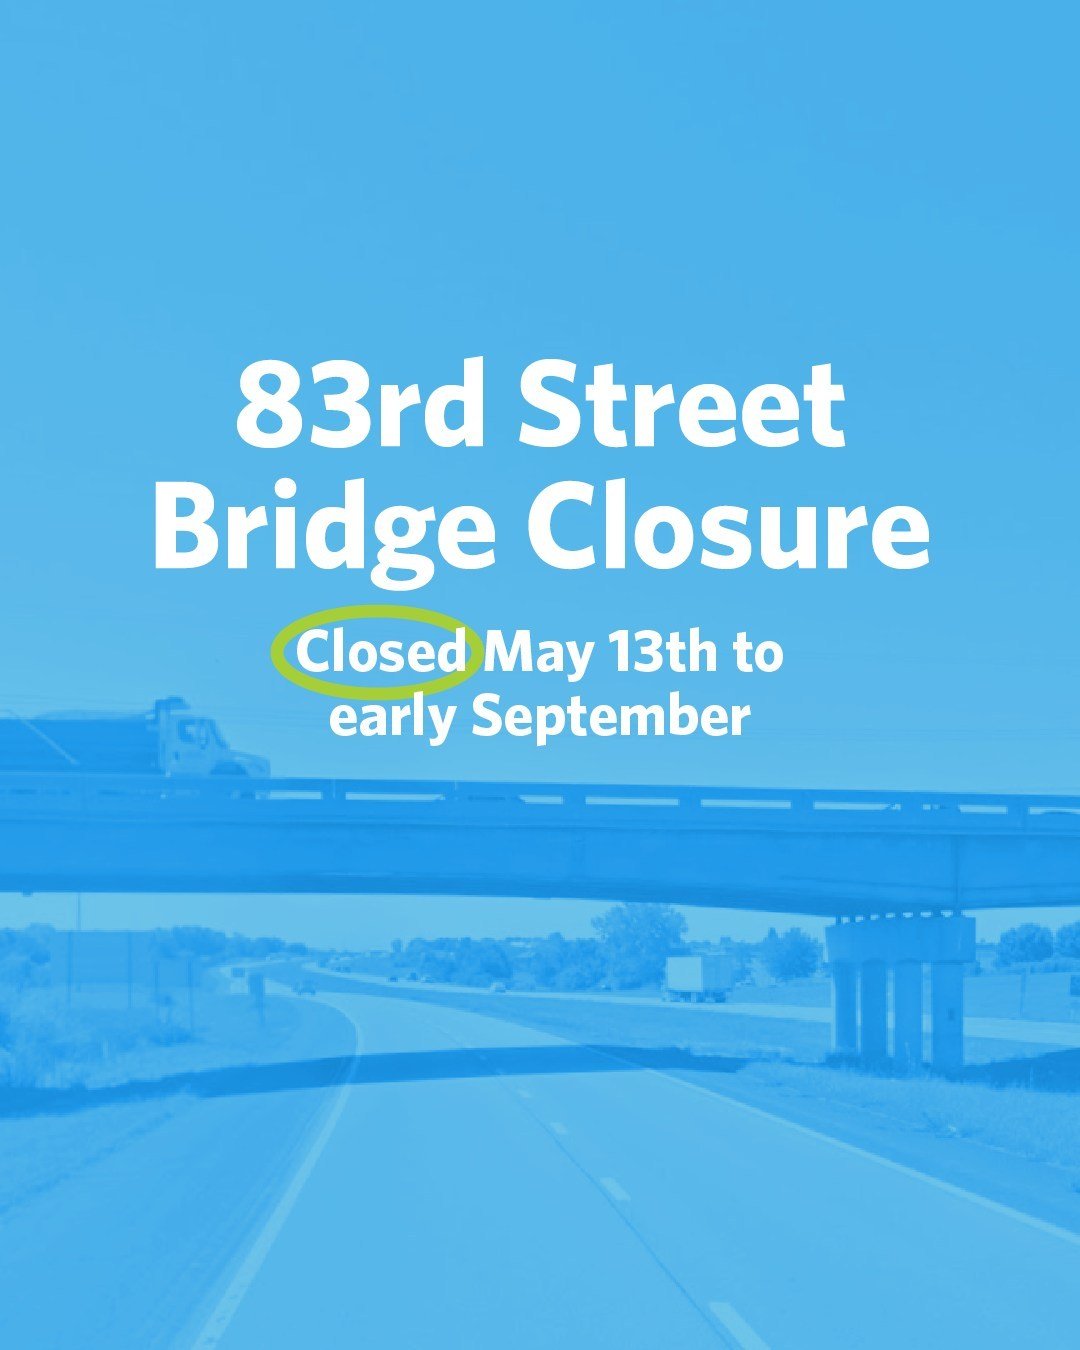 From May 13th to early September the 83rd Street bridge over K7 will be closed for repair. Plan your best route and leave yourself some extra time to get to Westside.
 
From the North / Shawnee
&bull;K7 South, exit onto Prairie Star to take detour to